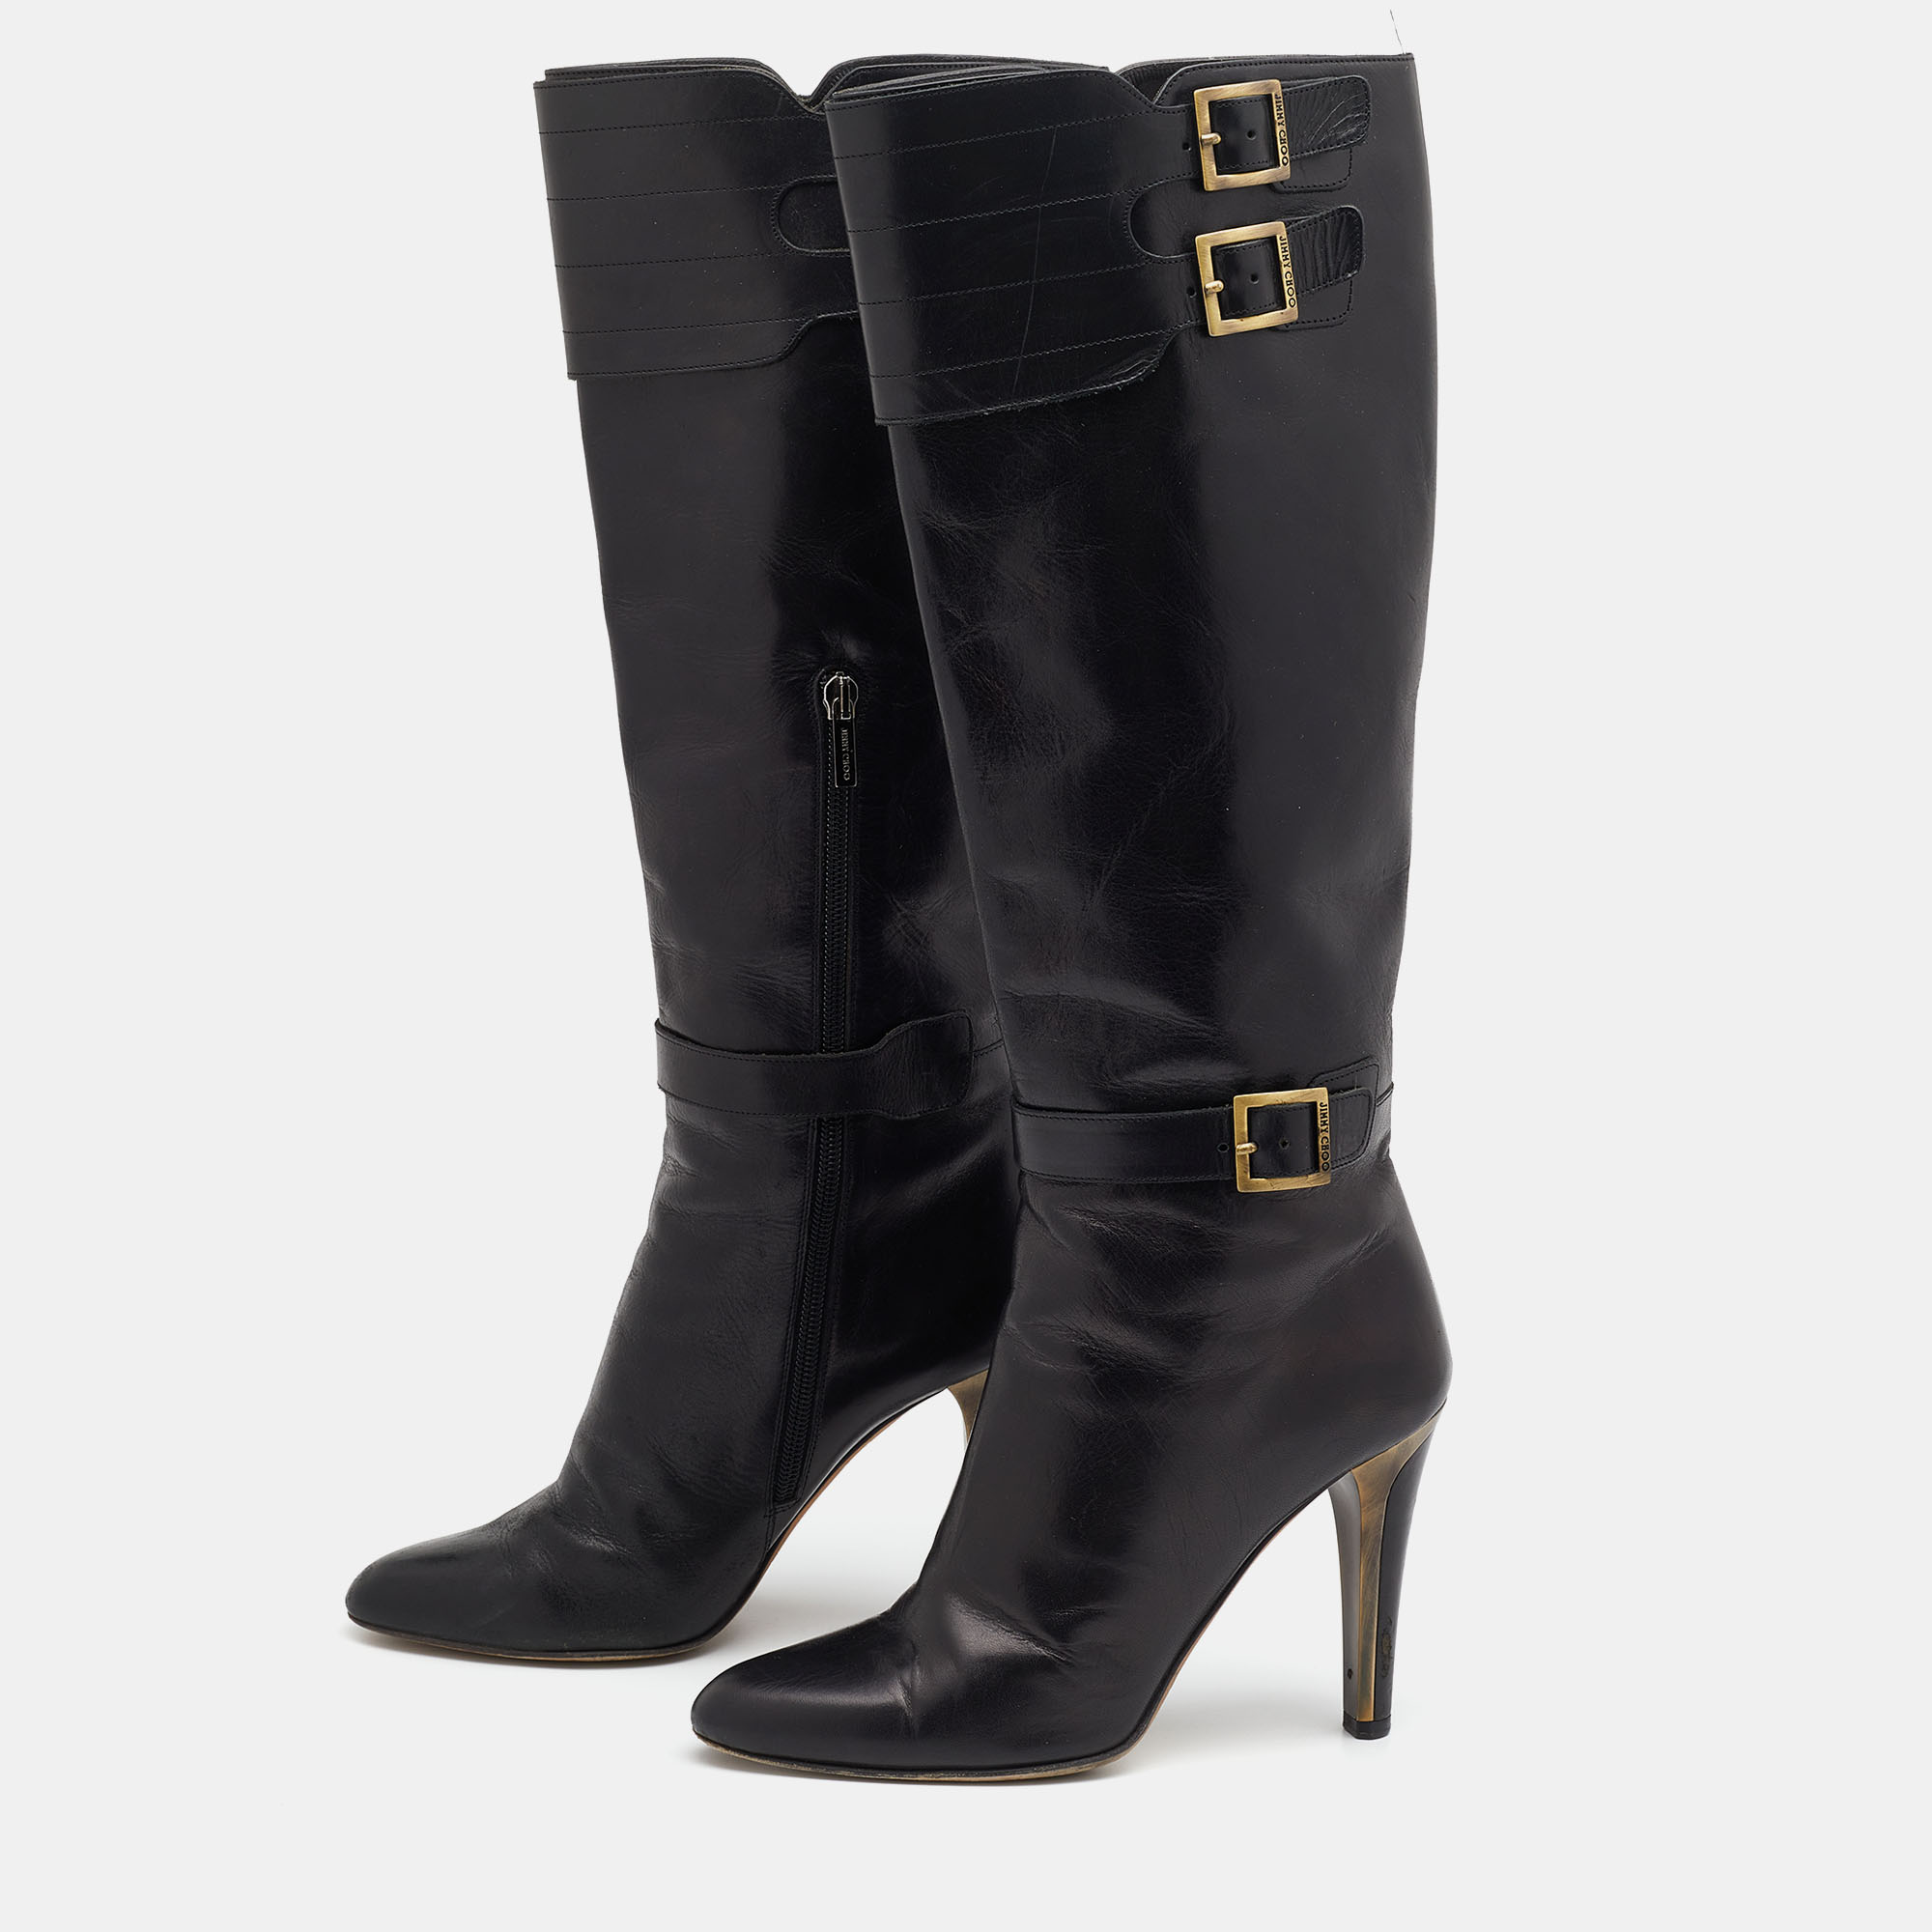 

Jimmy Choo Black Leather Buckle Detail Calf Length Boots Size